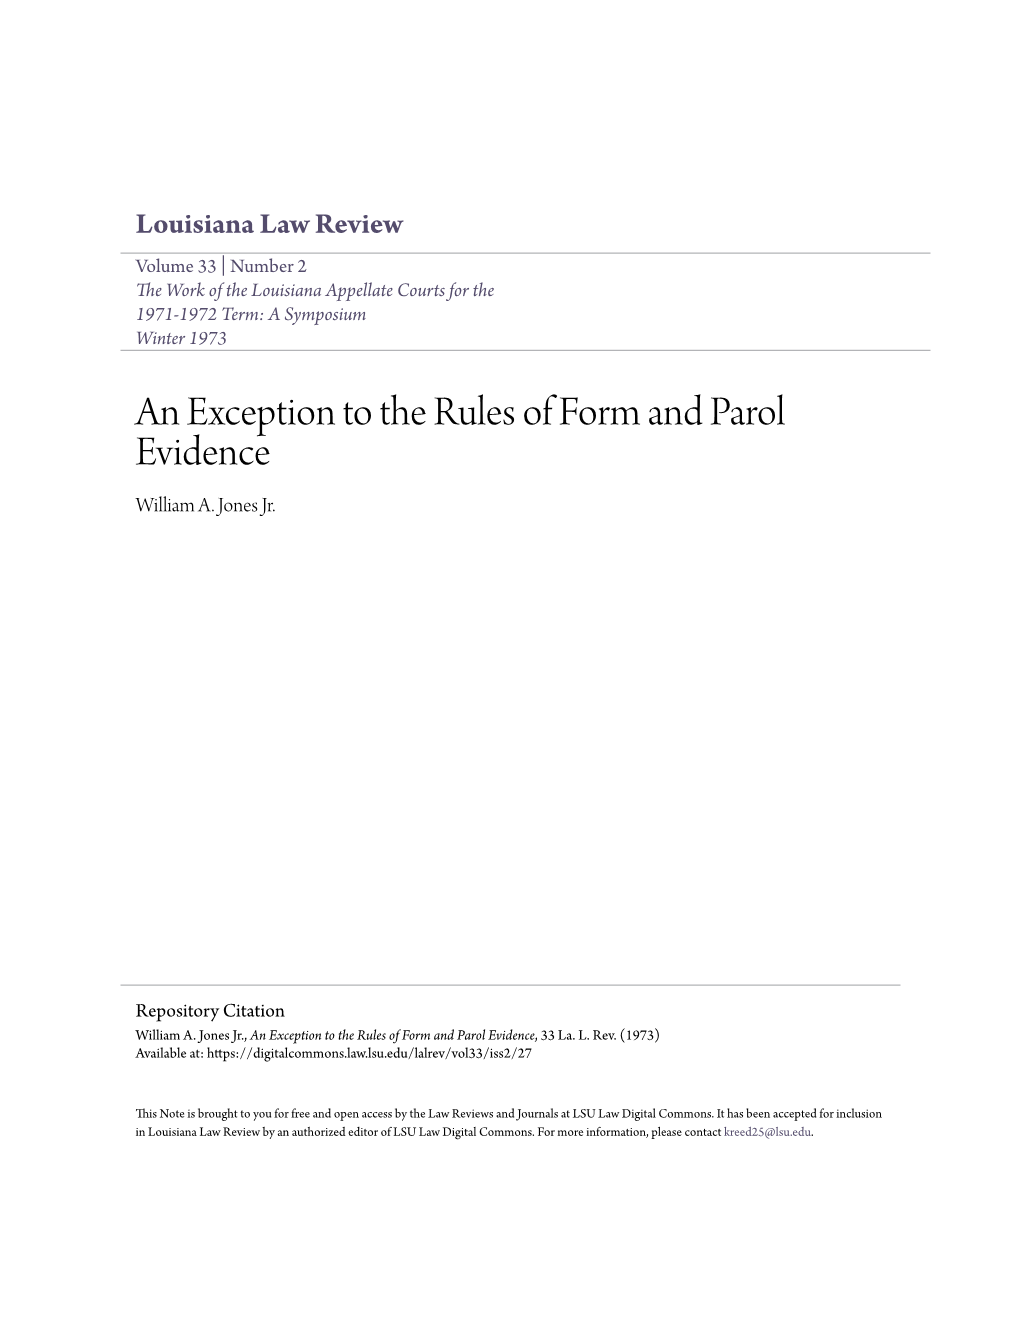 An Exception to the Rules of Form and Parol Evidence William A